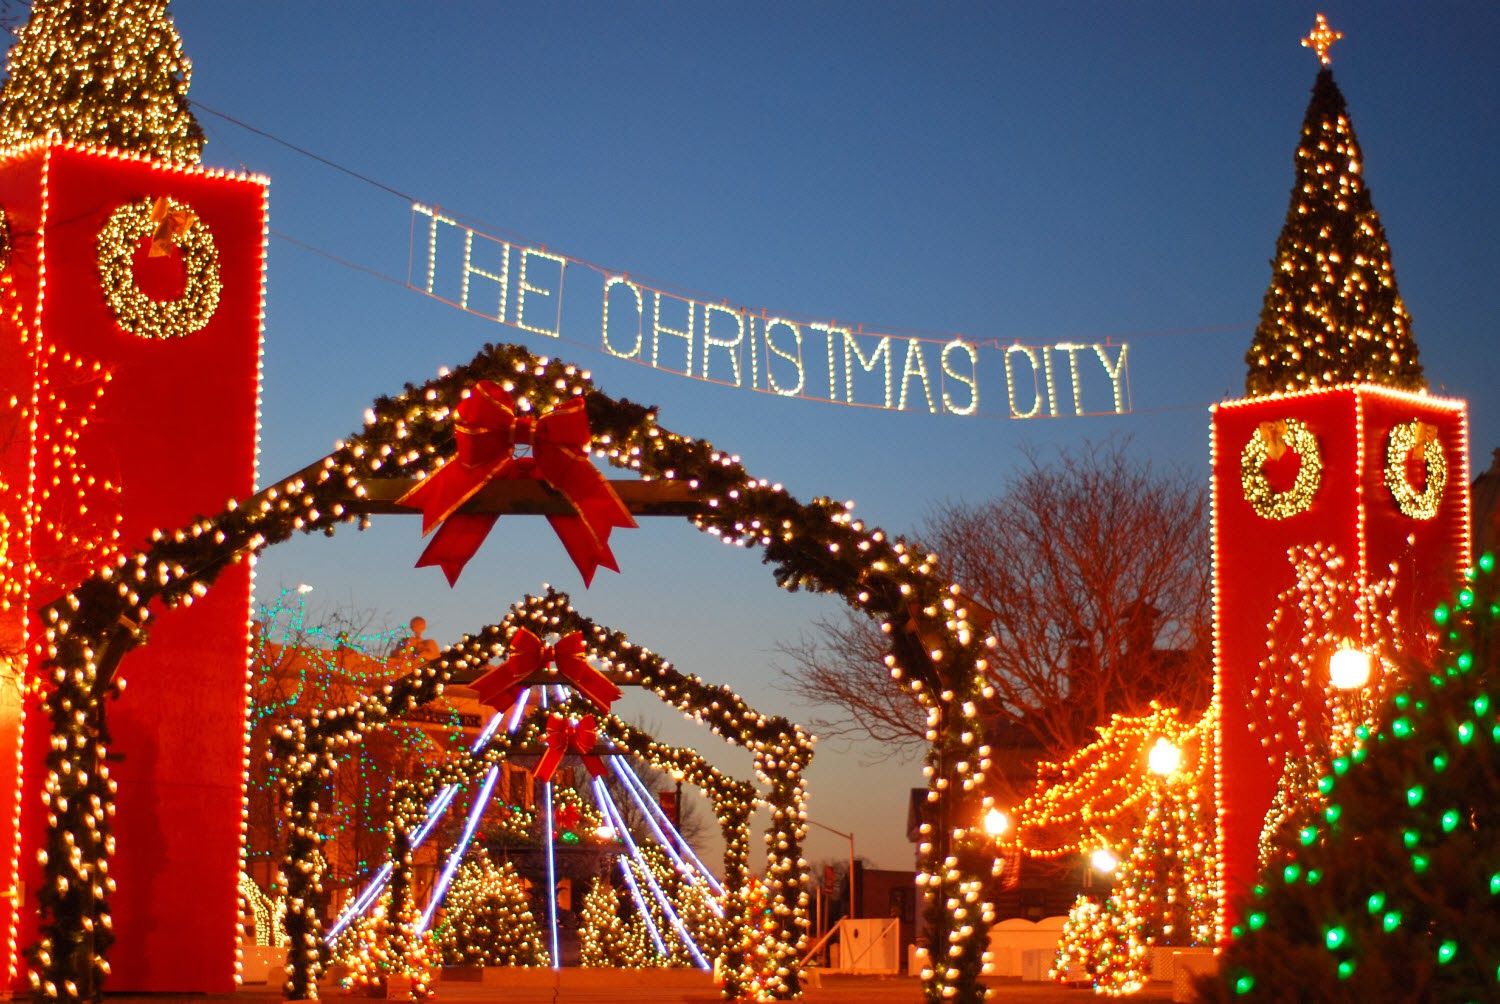 Wallpaper HD For Desktop Background: Christmas City Picture